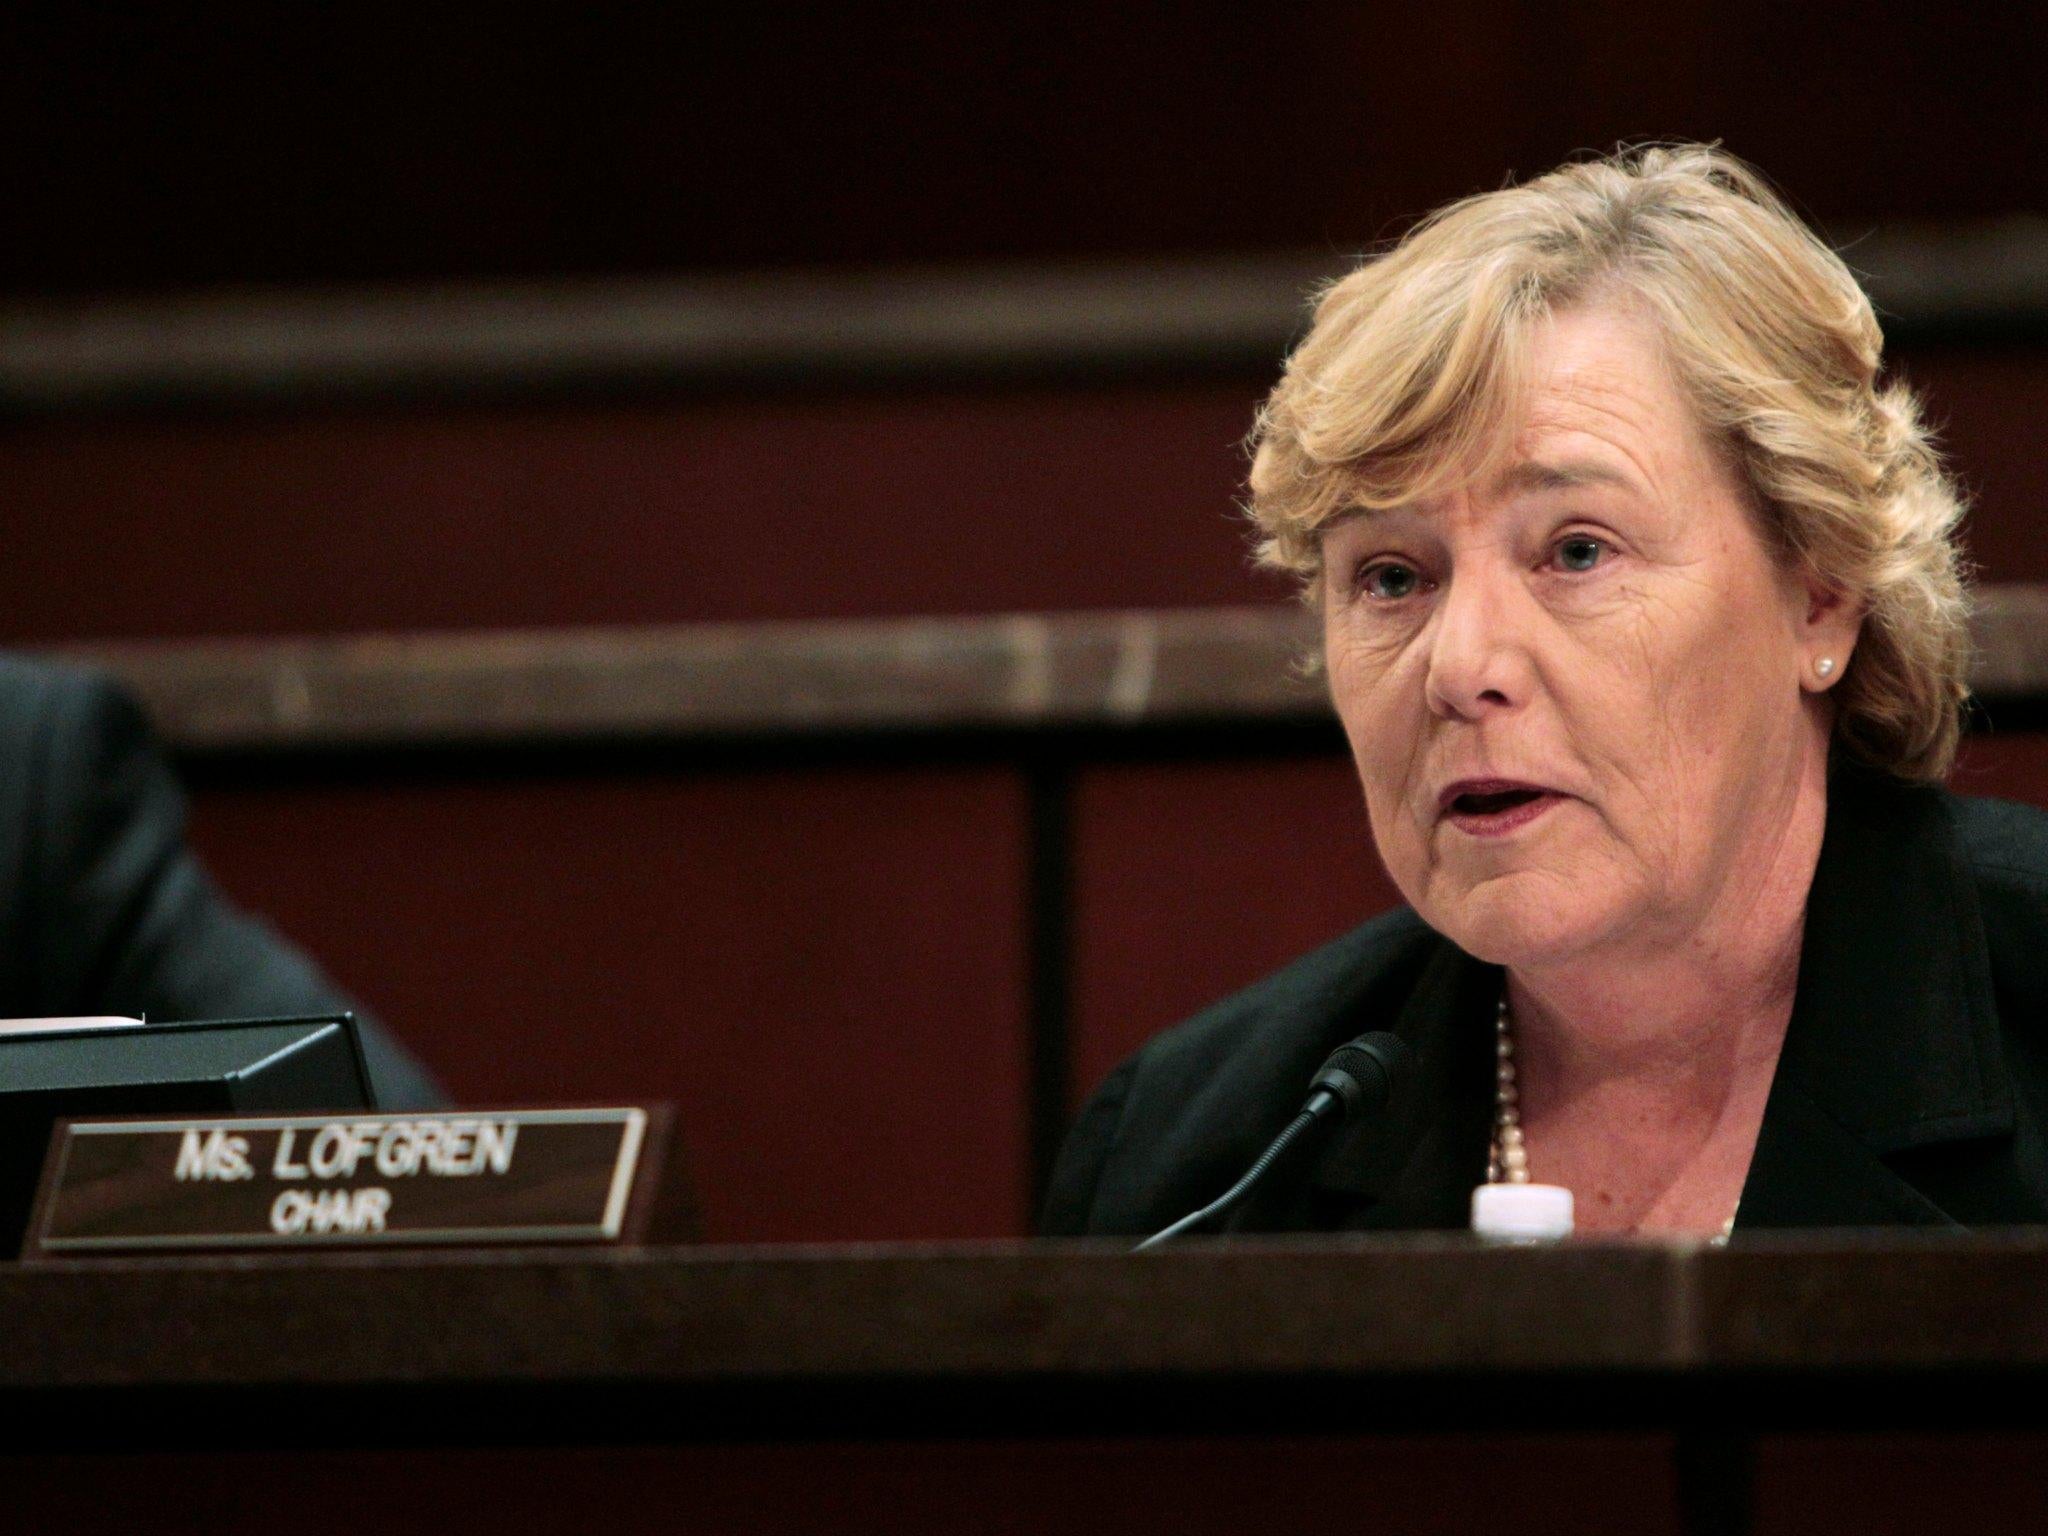 Zoe Lofgren's resolution is likely to get little support in the Republican-controlled Congress